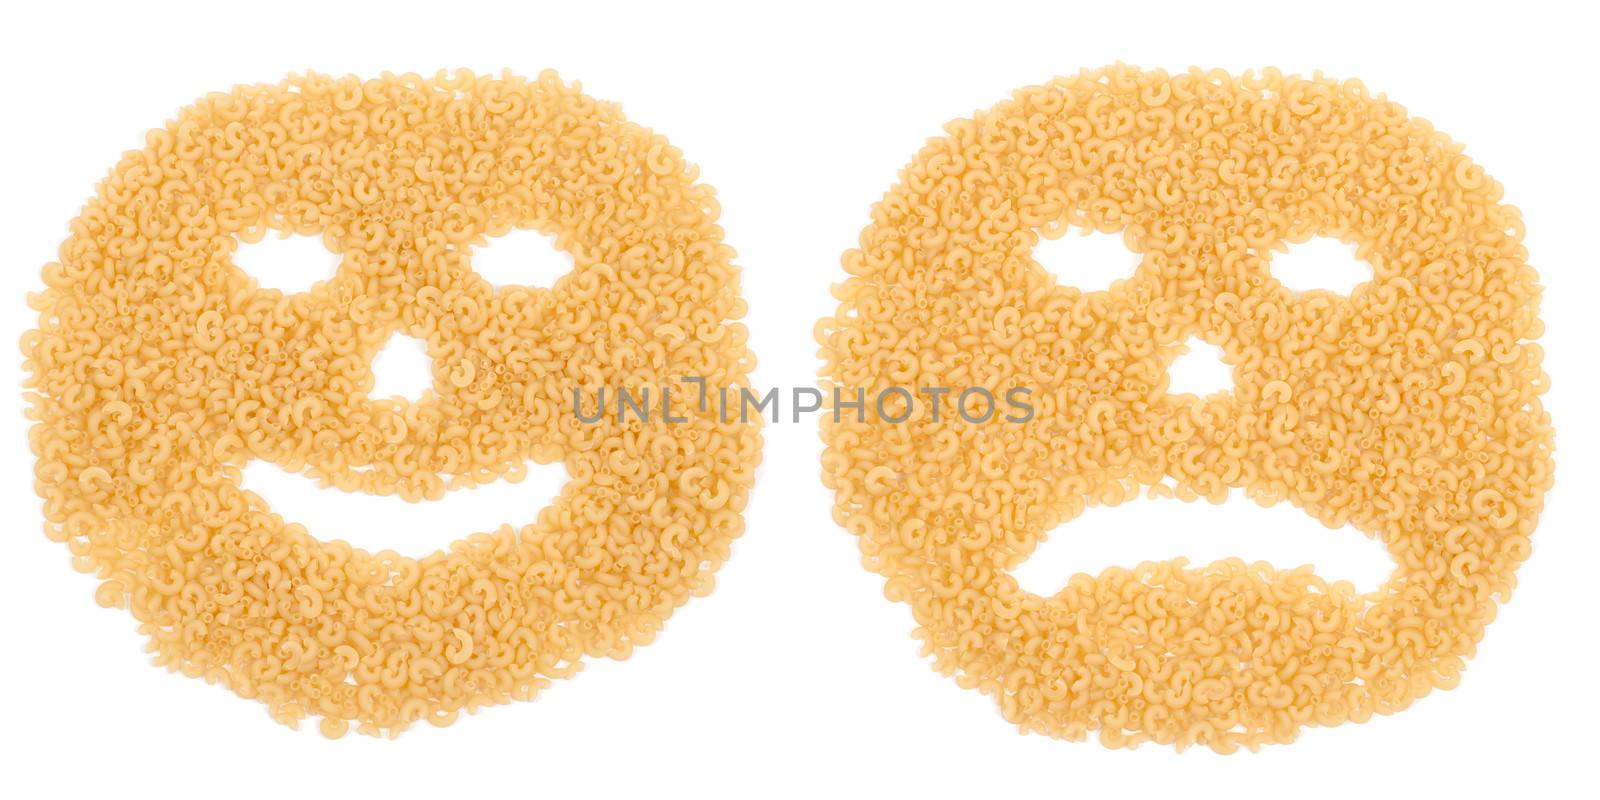 attractives smiling and crying pasta